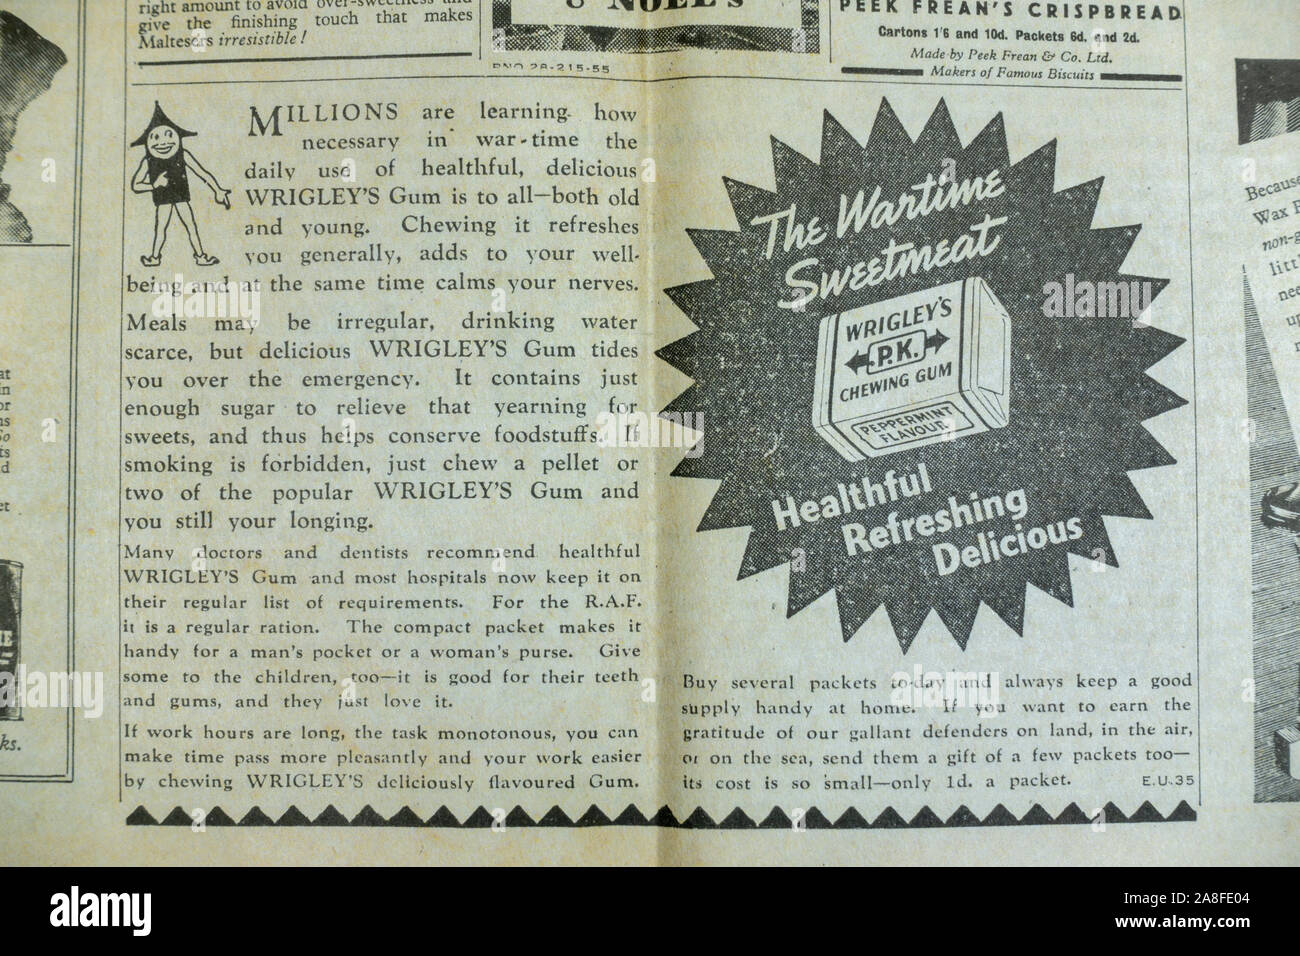 Advert for Wrigley's PK Chewing Gum the Daily Express newspaper (replica) on 31st May 1940 during the Dunkirk evacuation. Stock Photo